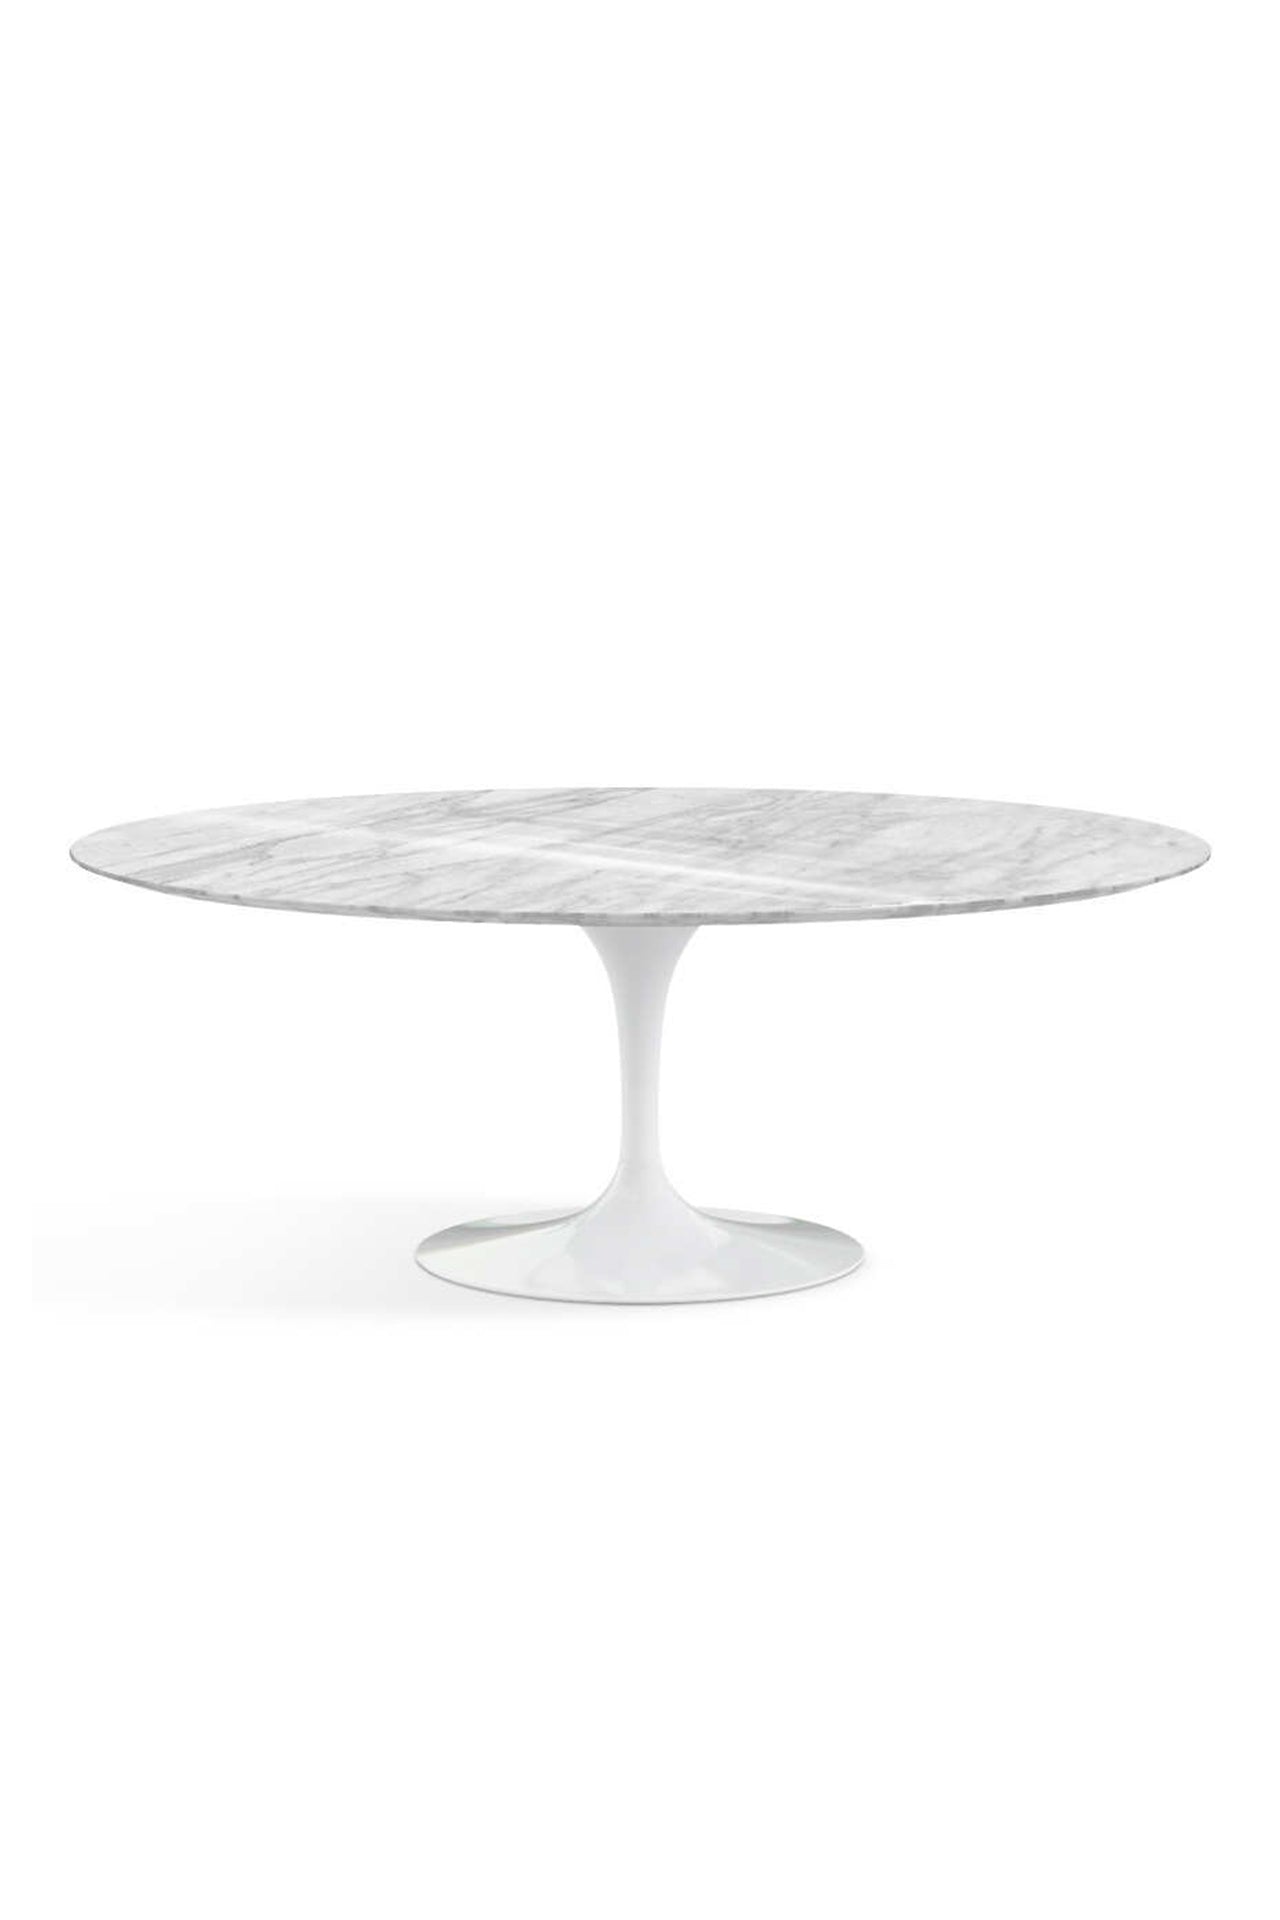 Herman Miller Saarinen Dining Table 78" Oval with White Base and Marble Top Image (6605647970419)